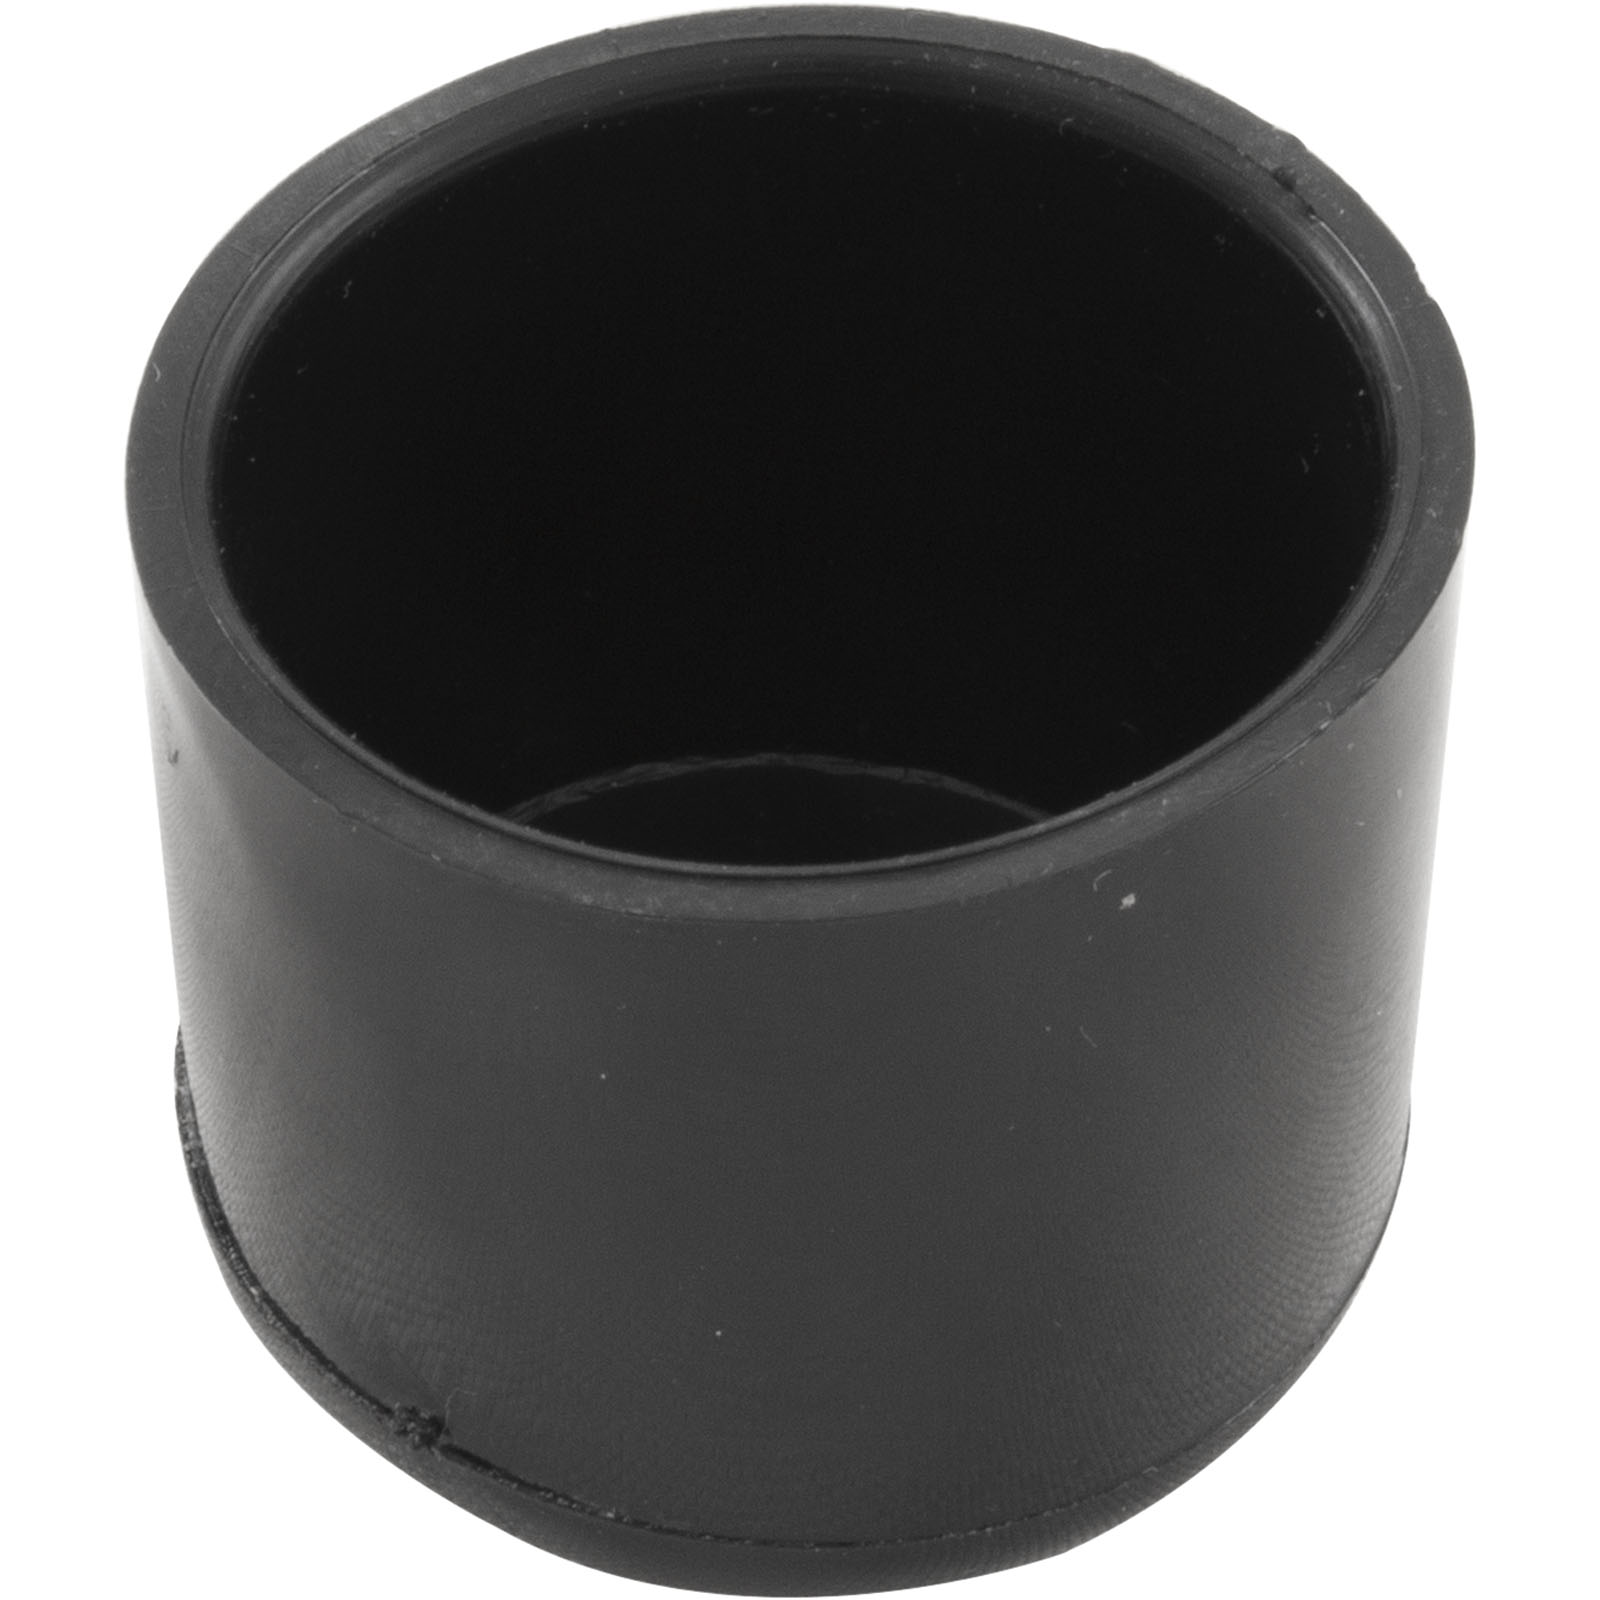 Picture of 99-30-4300525SINGLE Fence Post Cap GLI Pool Products Vinyl Black